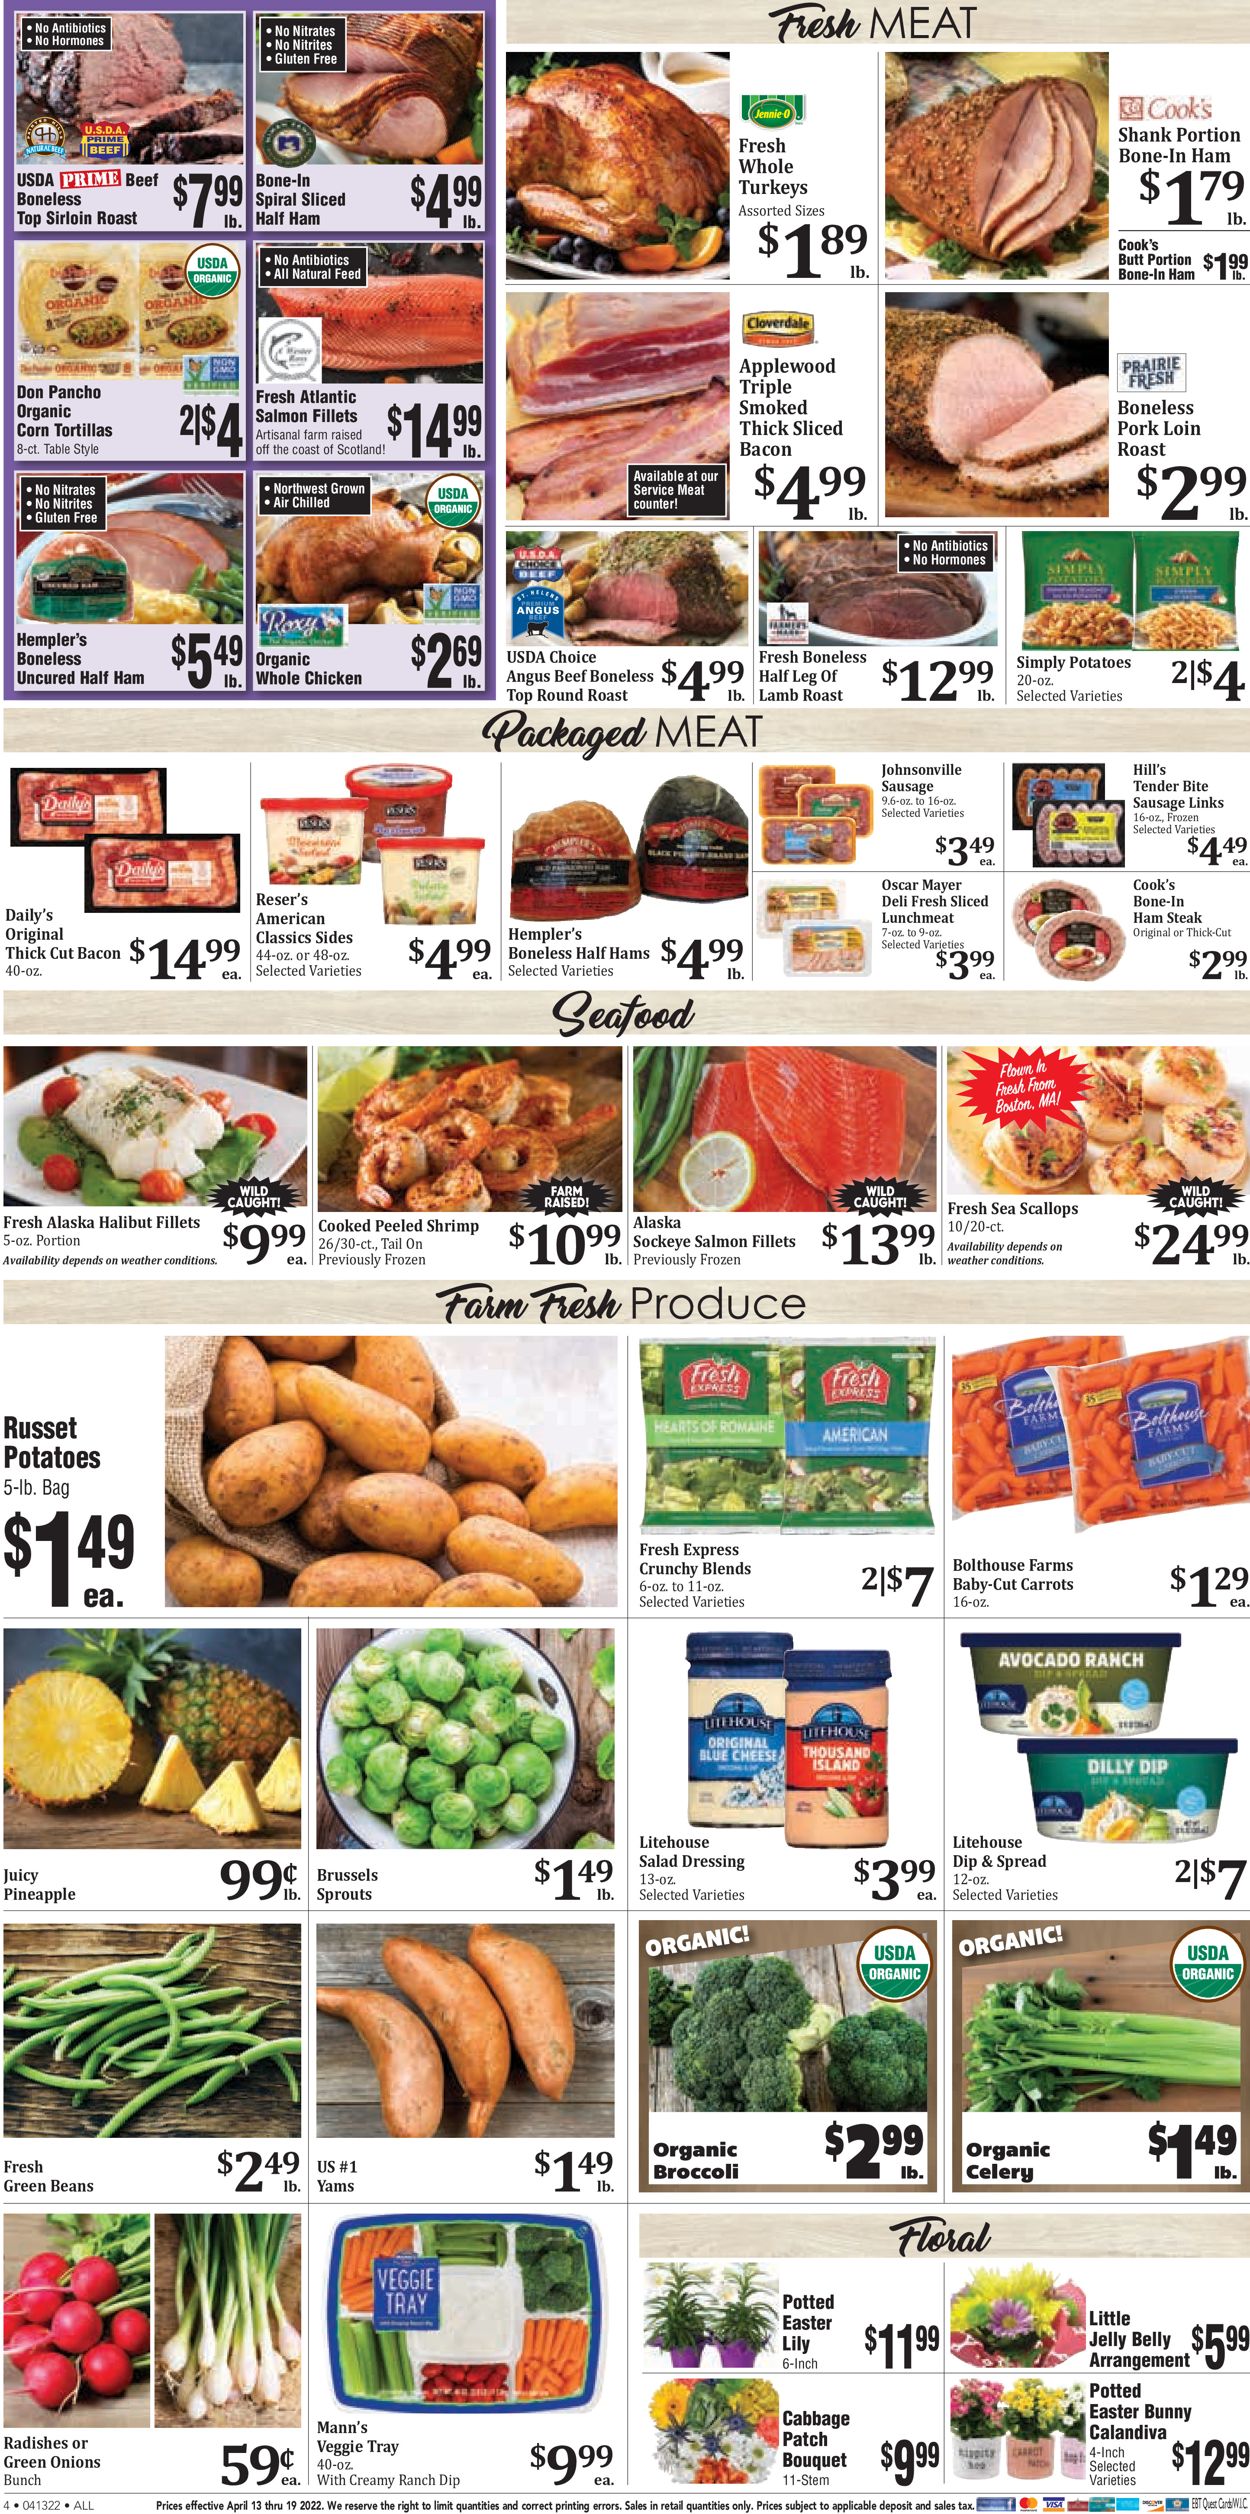 Rosauers EASTER AD 2022 Weekly Ad Circular - valid 04/13-04/19/2022 (Page 3)